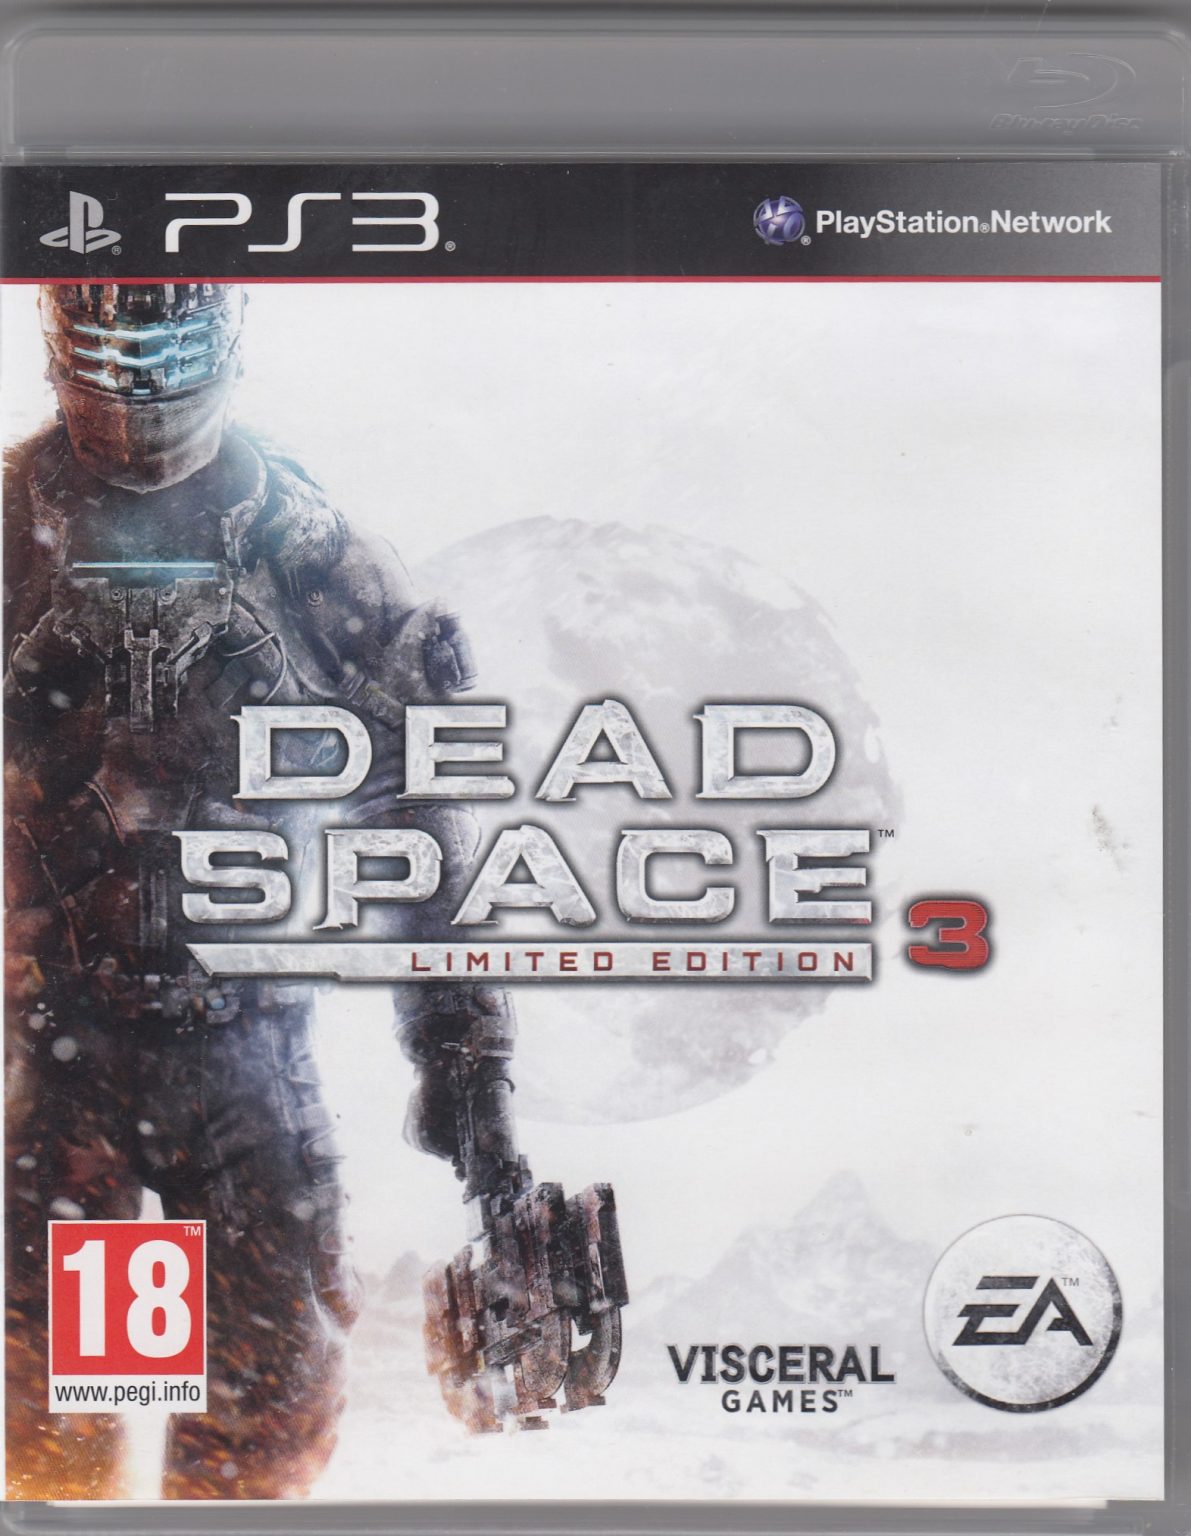 dead space 3 limited edition content